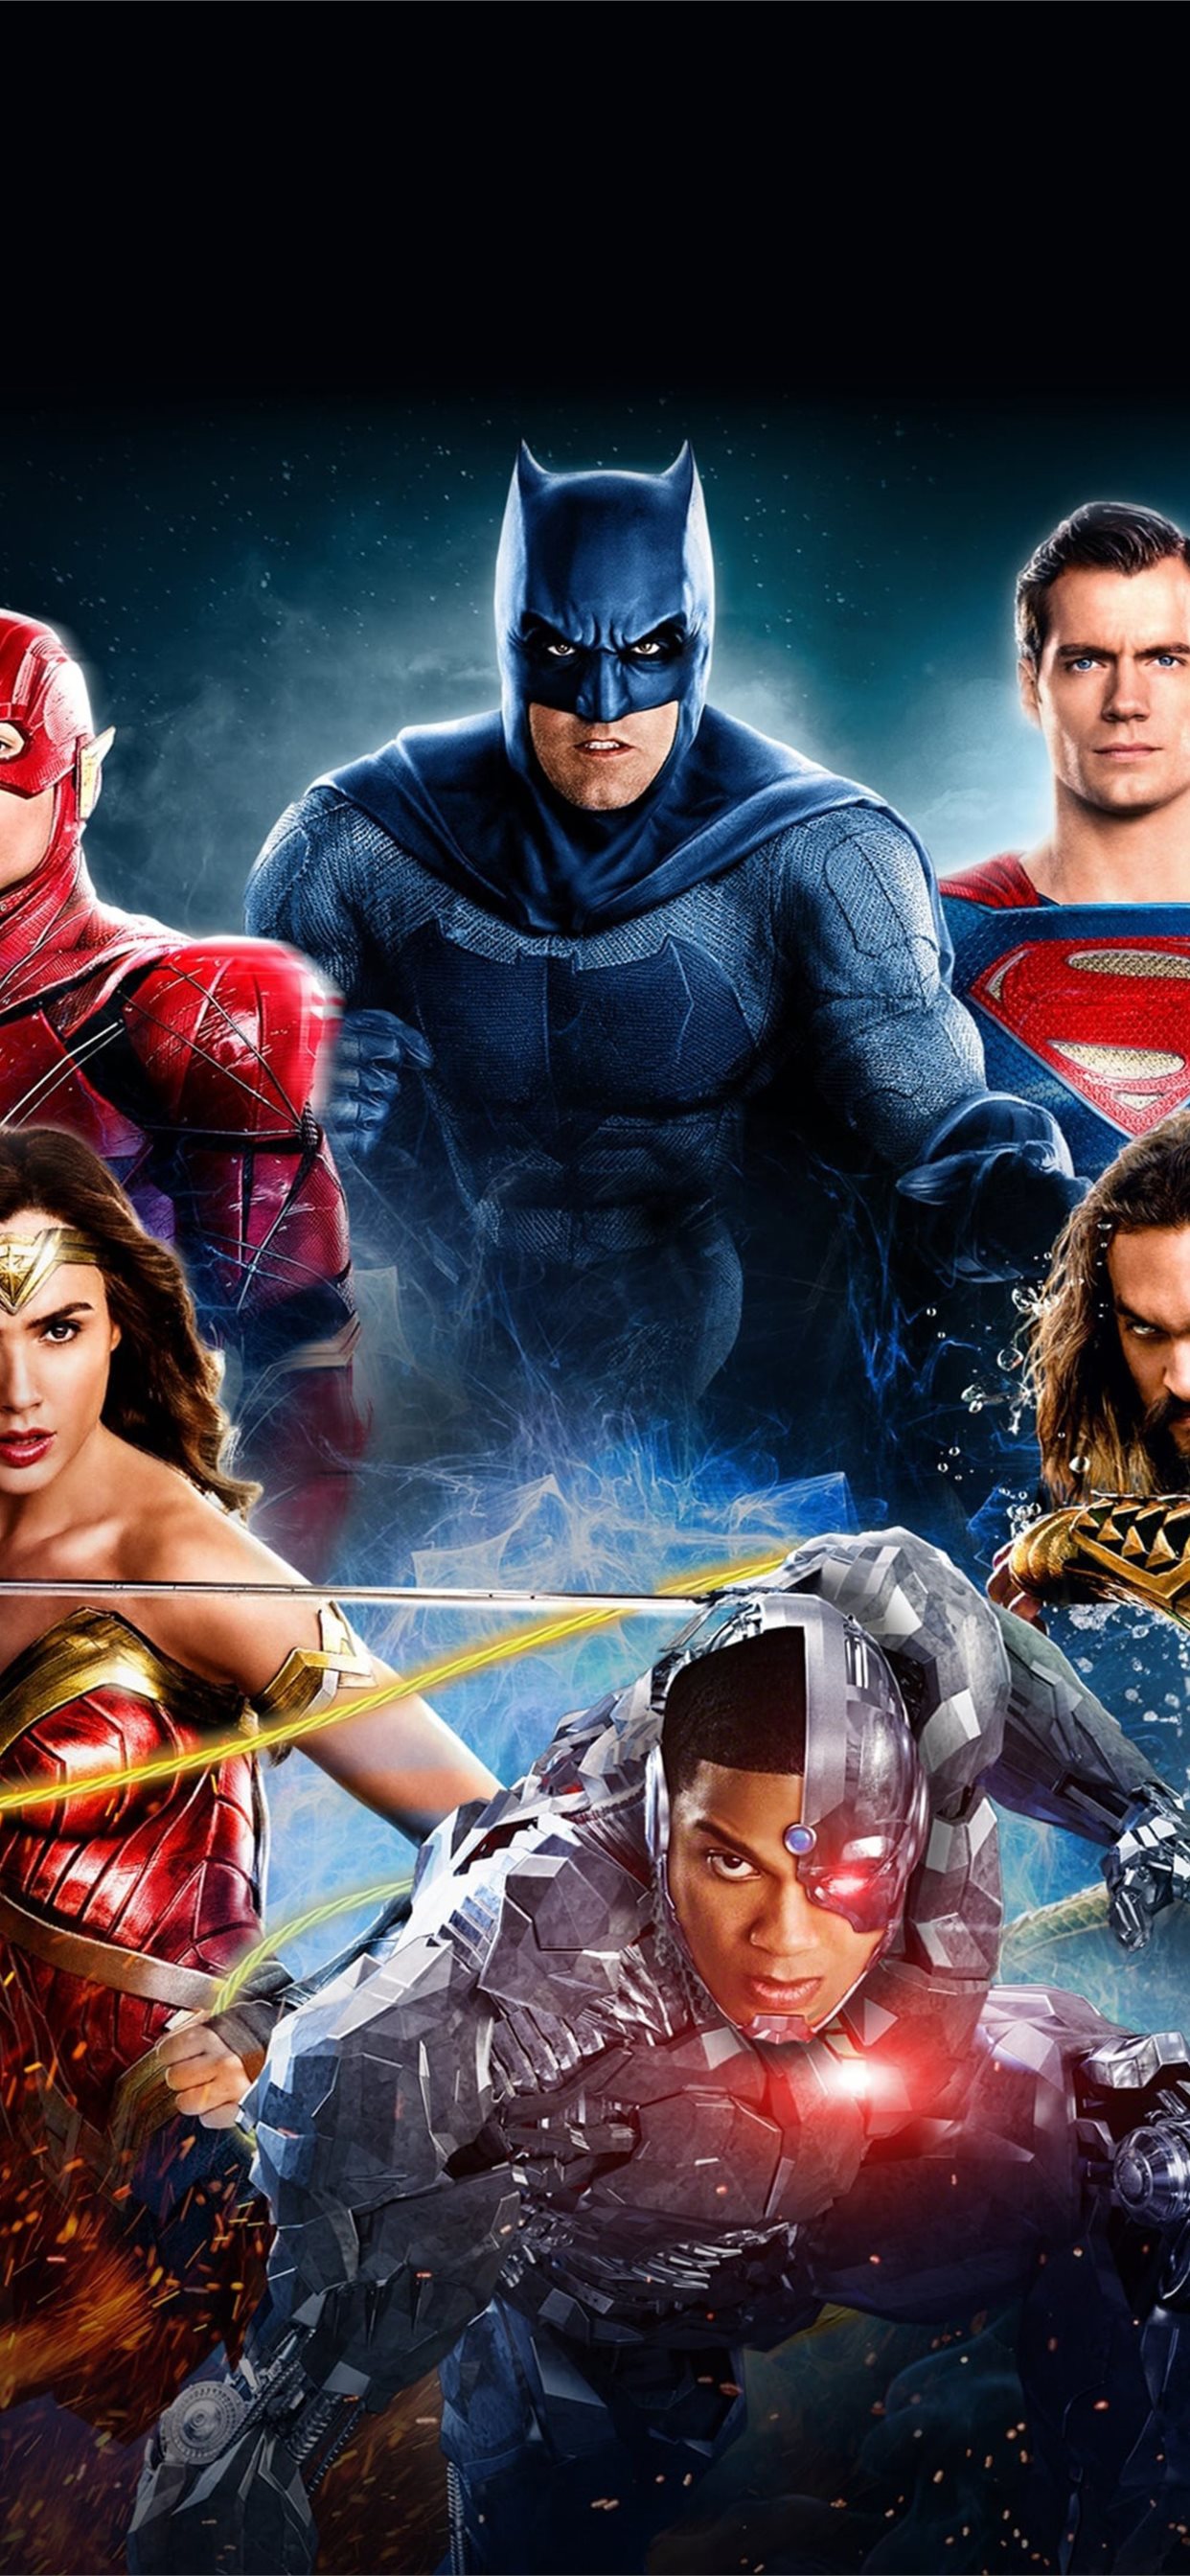 justice league synder cut 2021 iPhone X Wallpapers Download 1242x2688